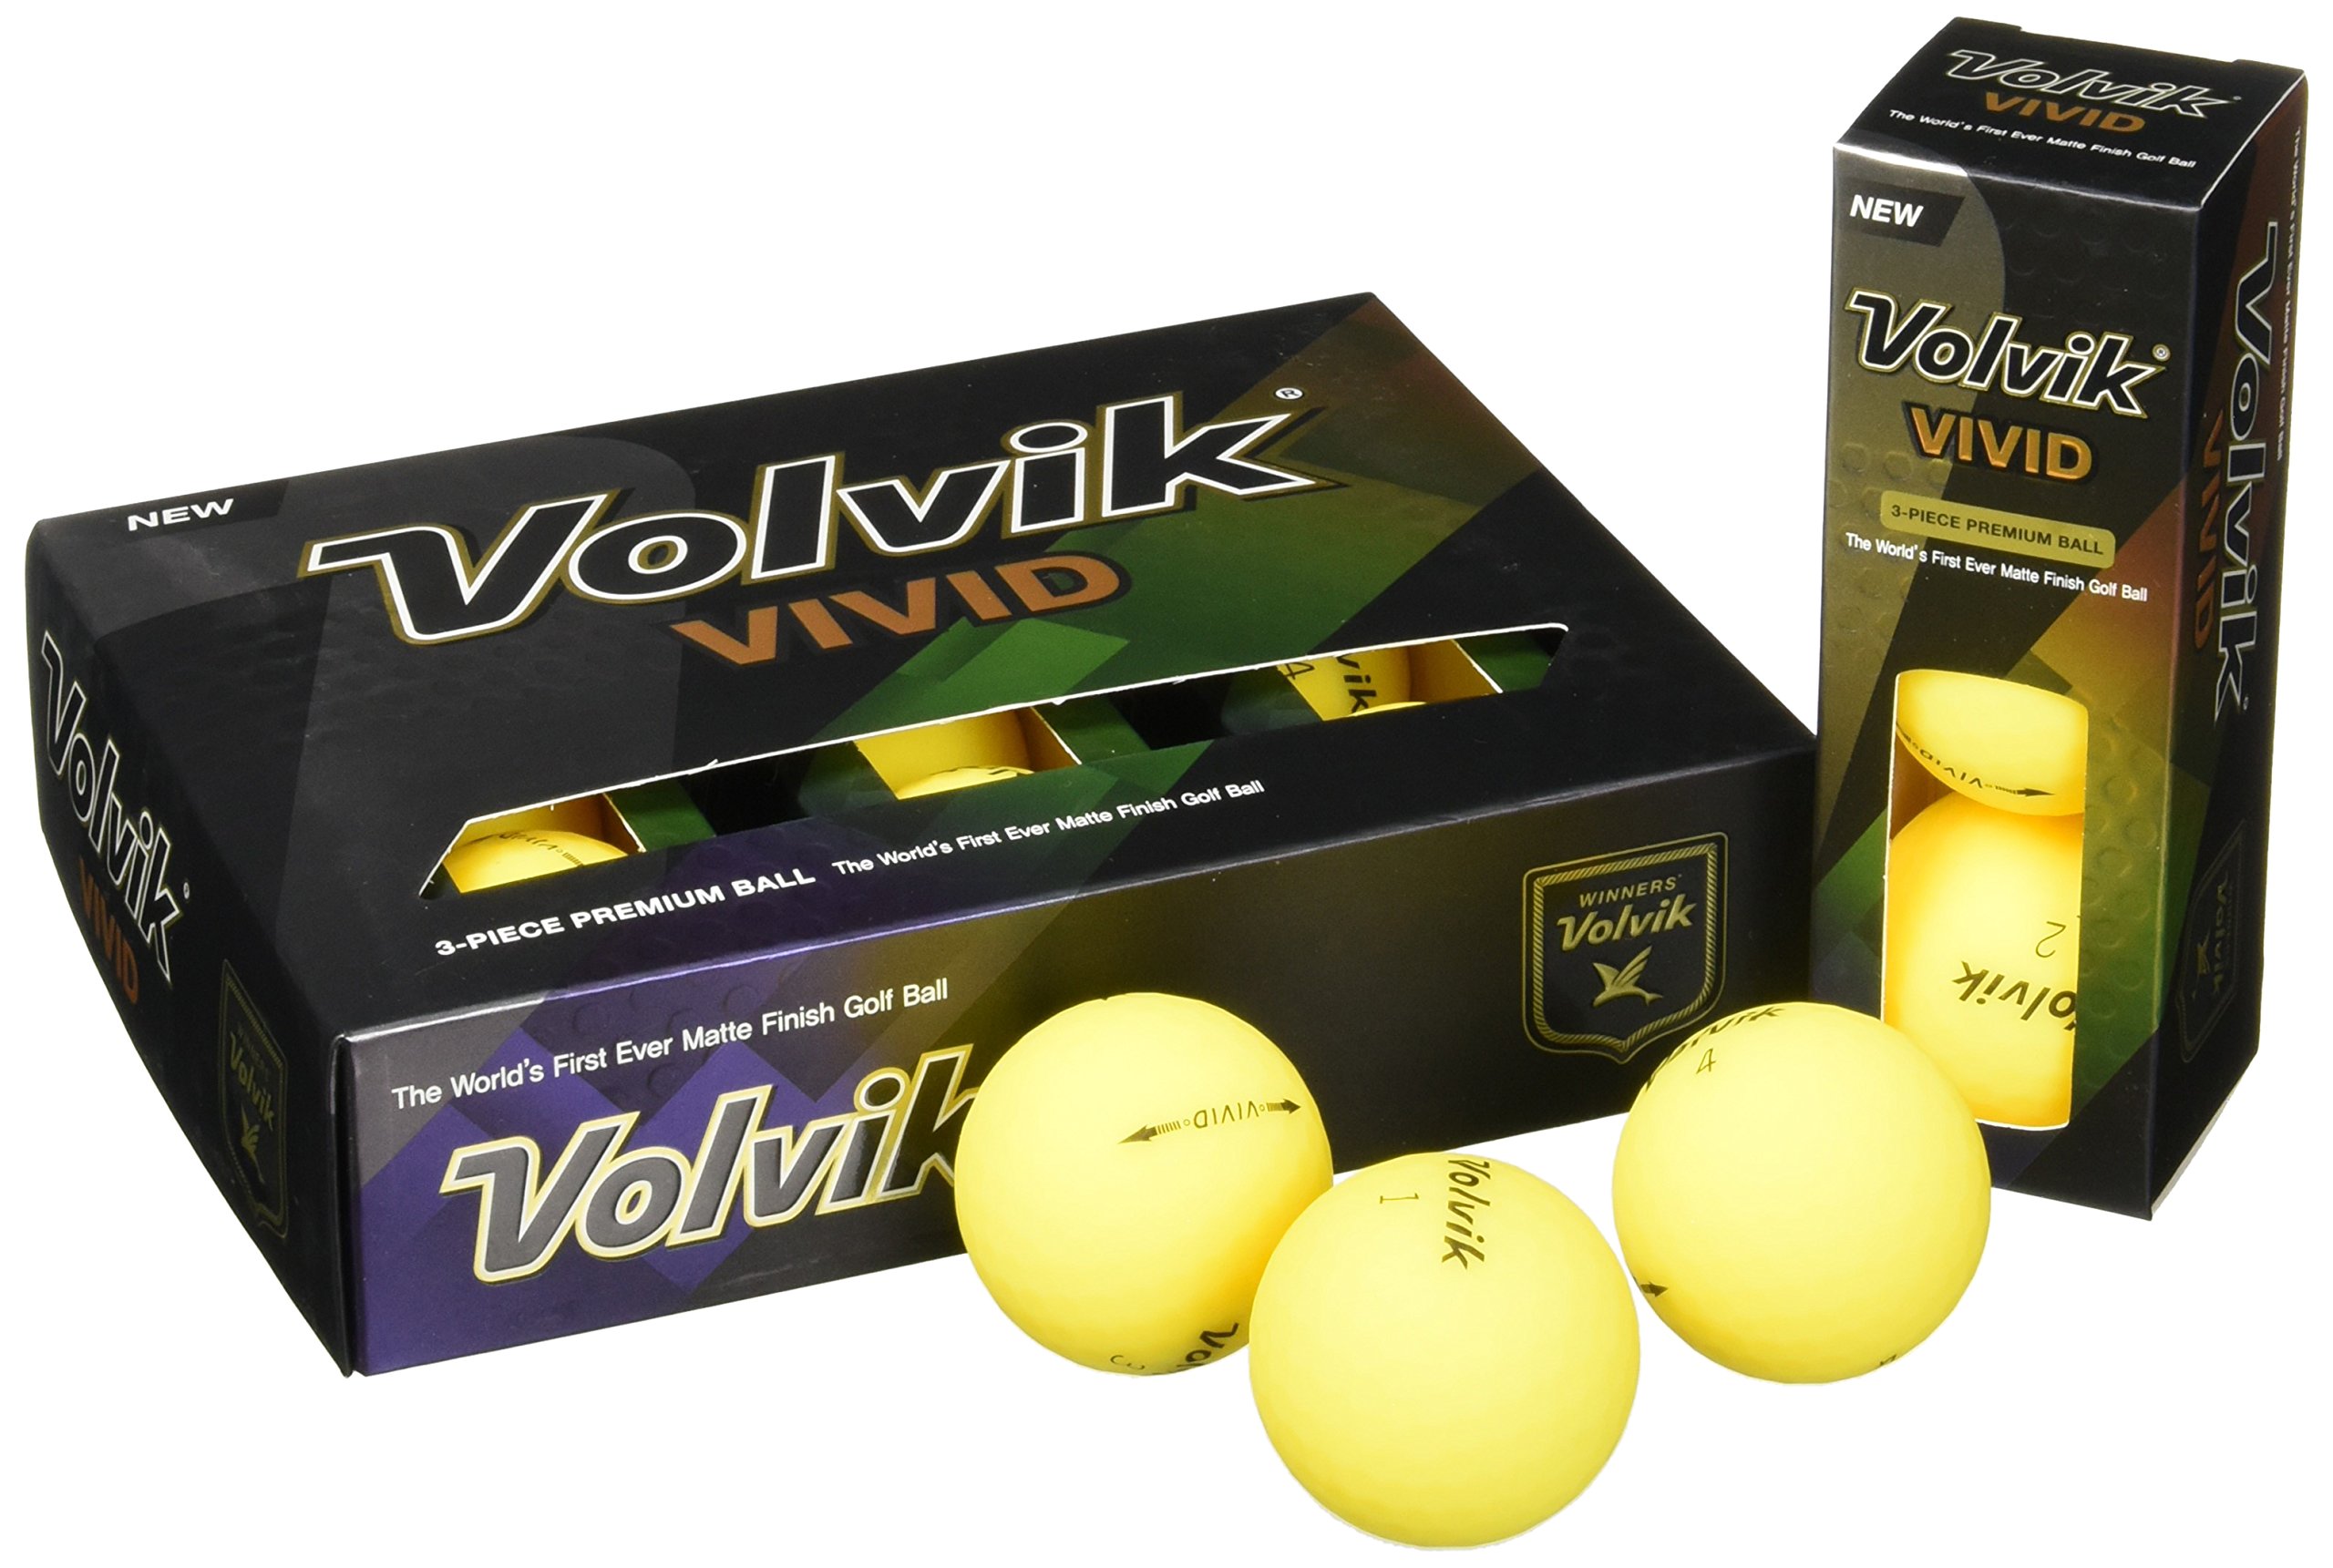 Are yellow golf balls better in winter